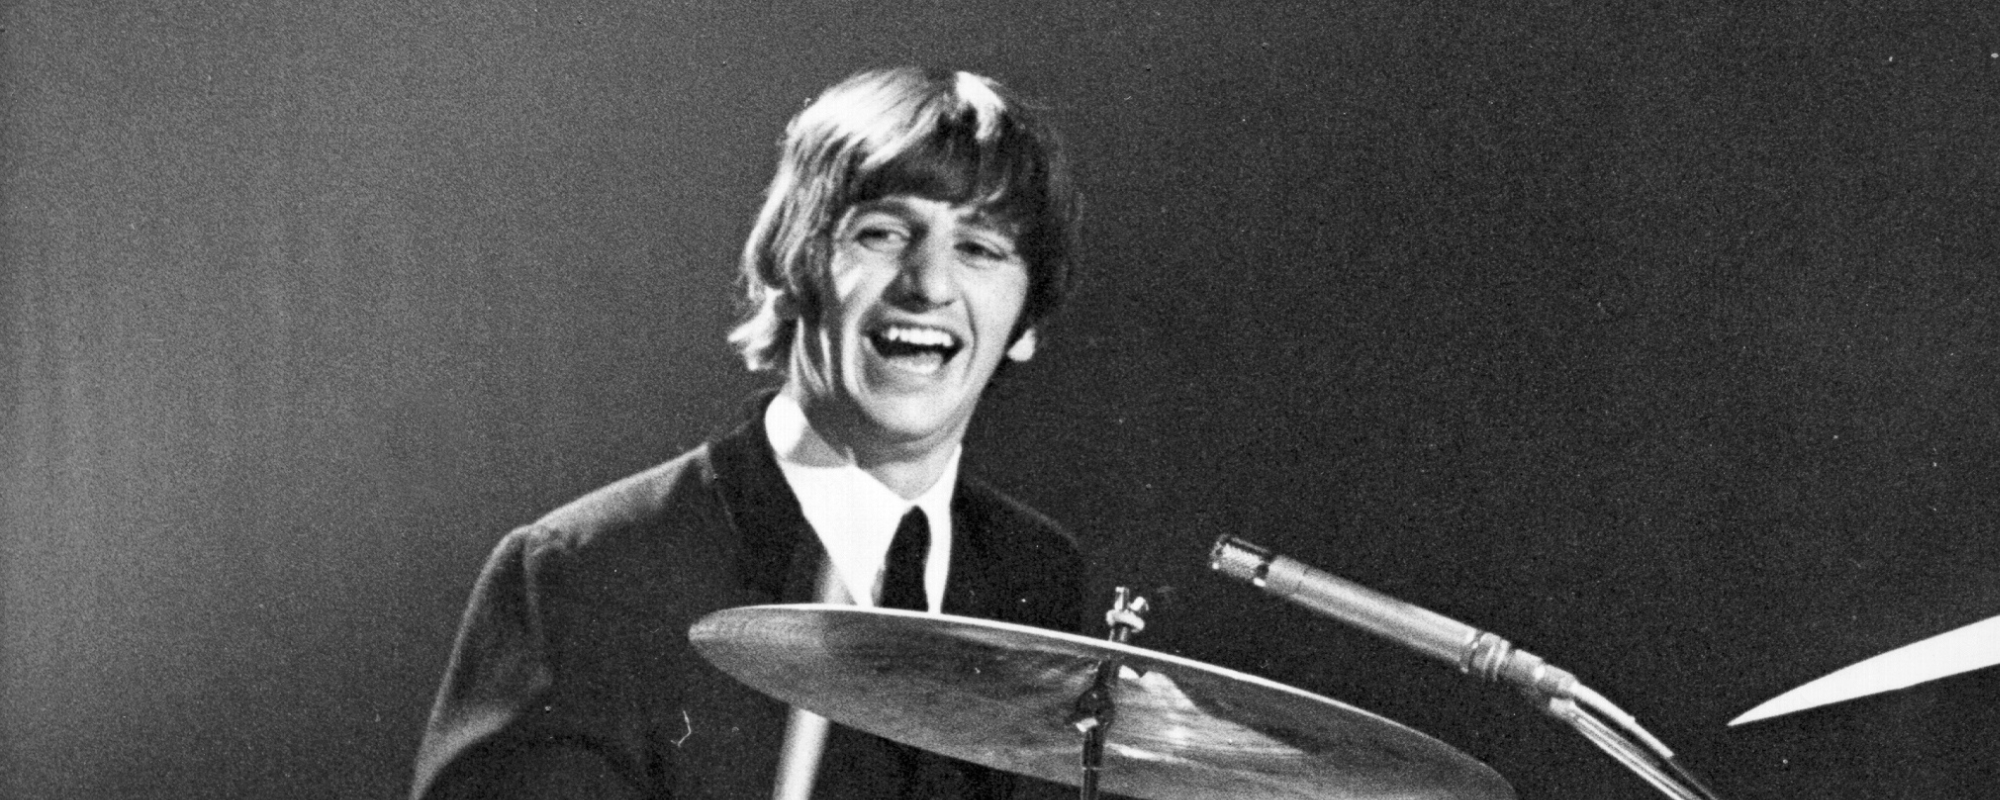 The Beatles Song Ringo Starr Didn't Like Recording